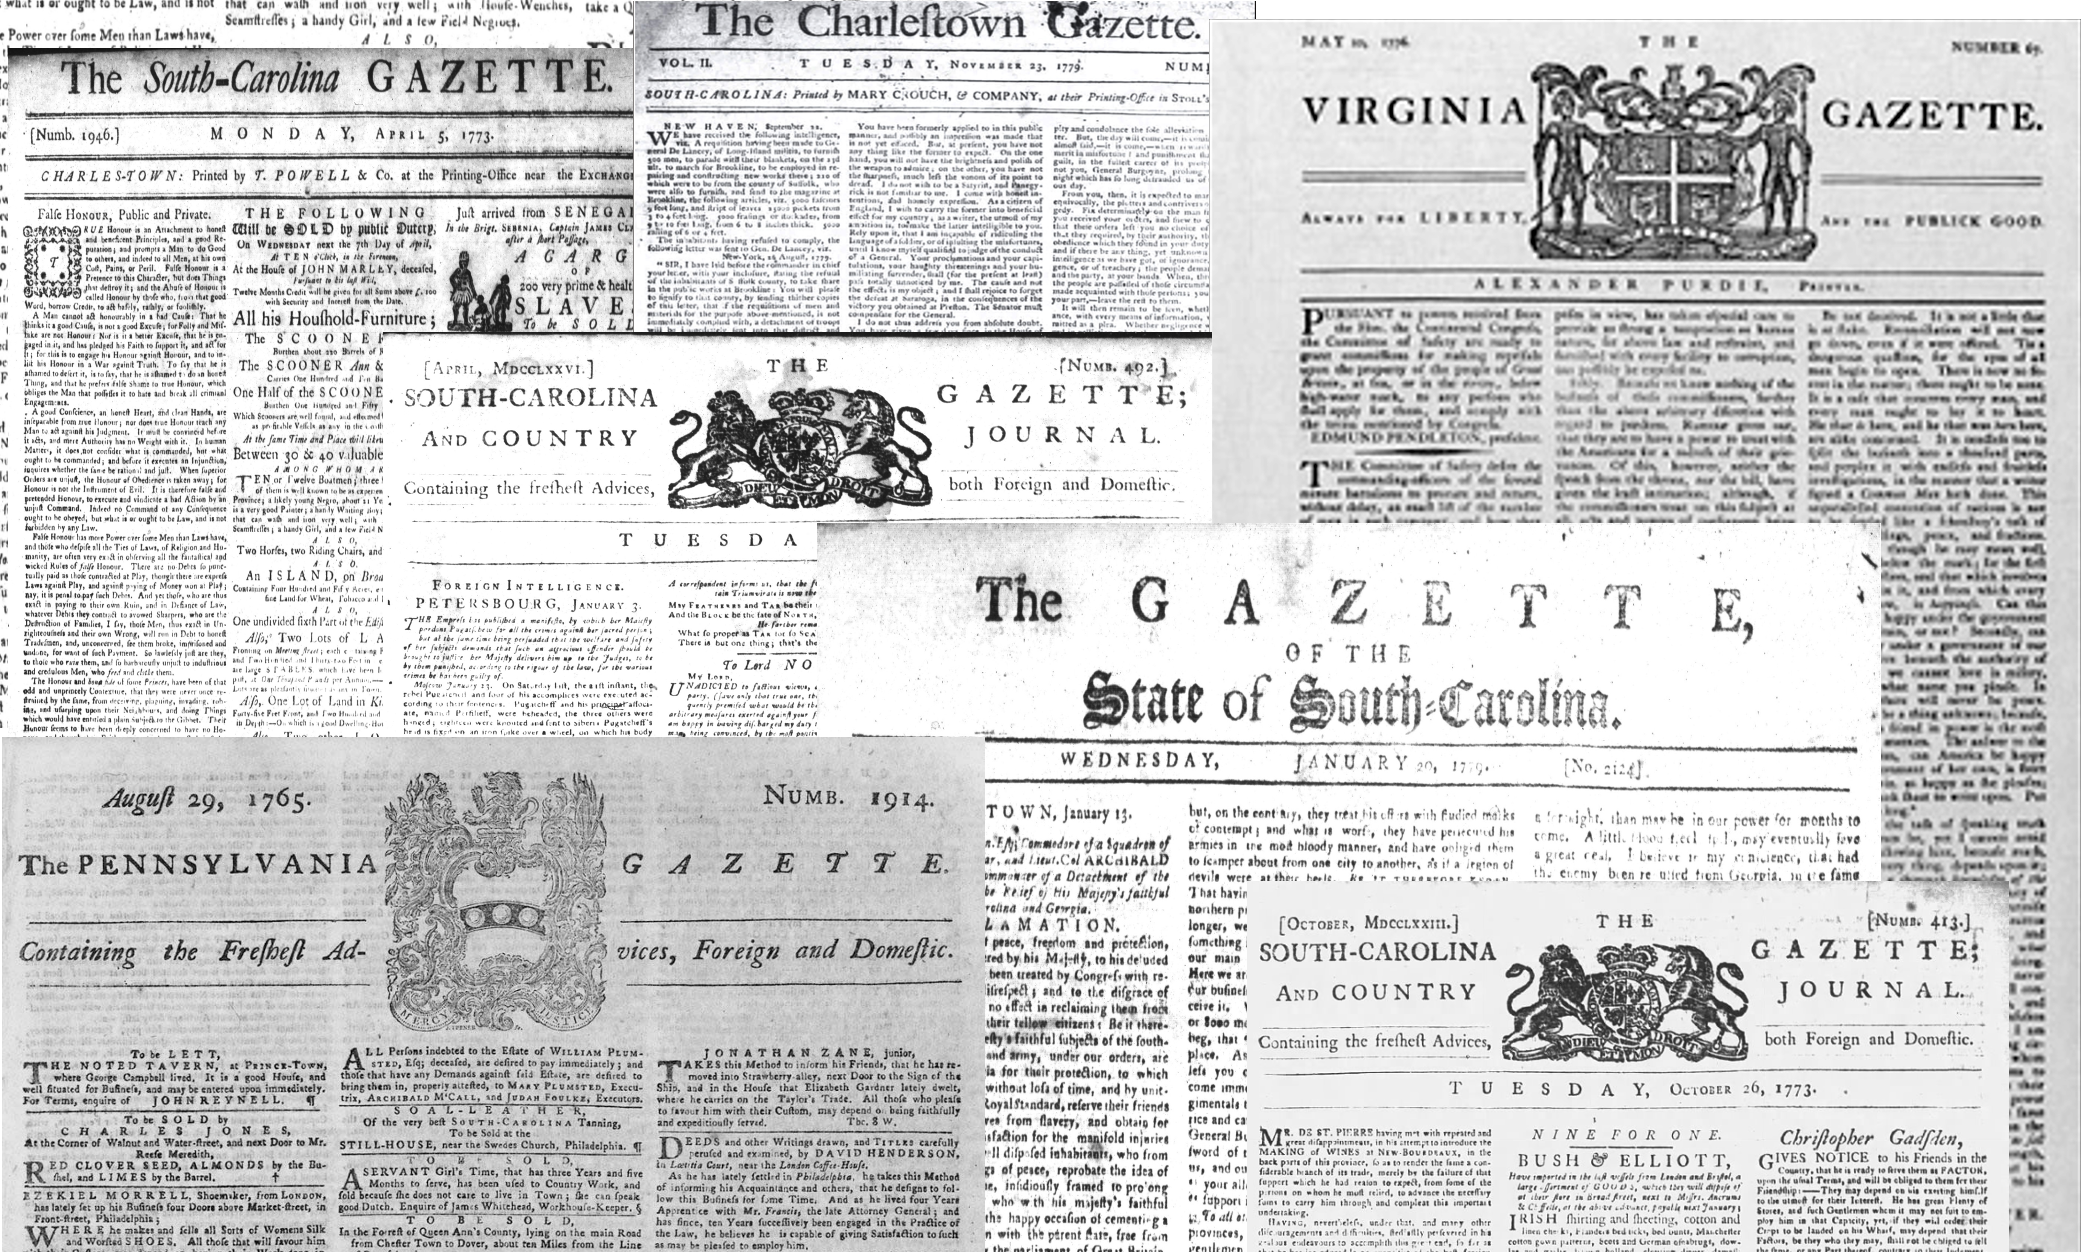 Accessible Archives/History Commons: Colonial Newspapers - Coherent  Digital, LLC